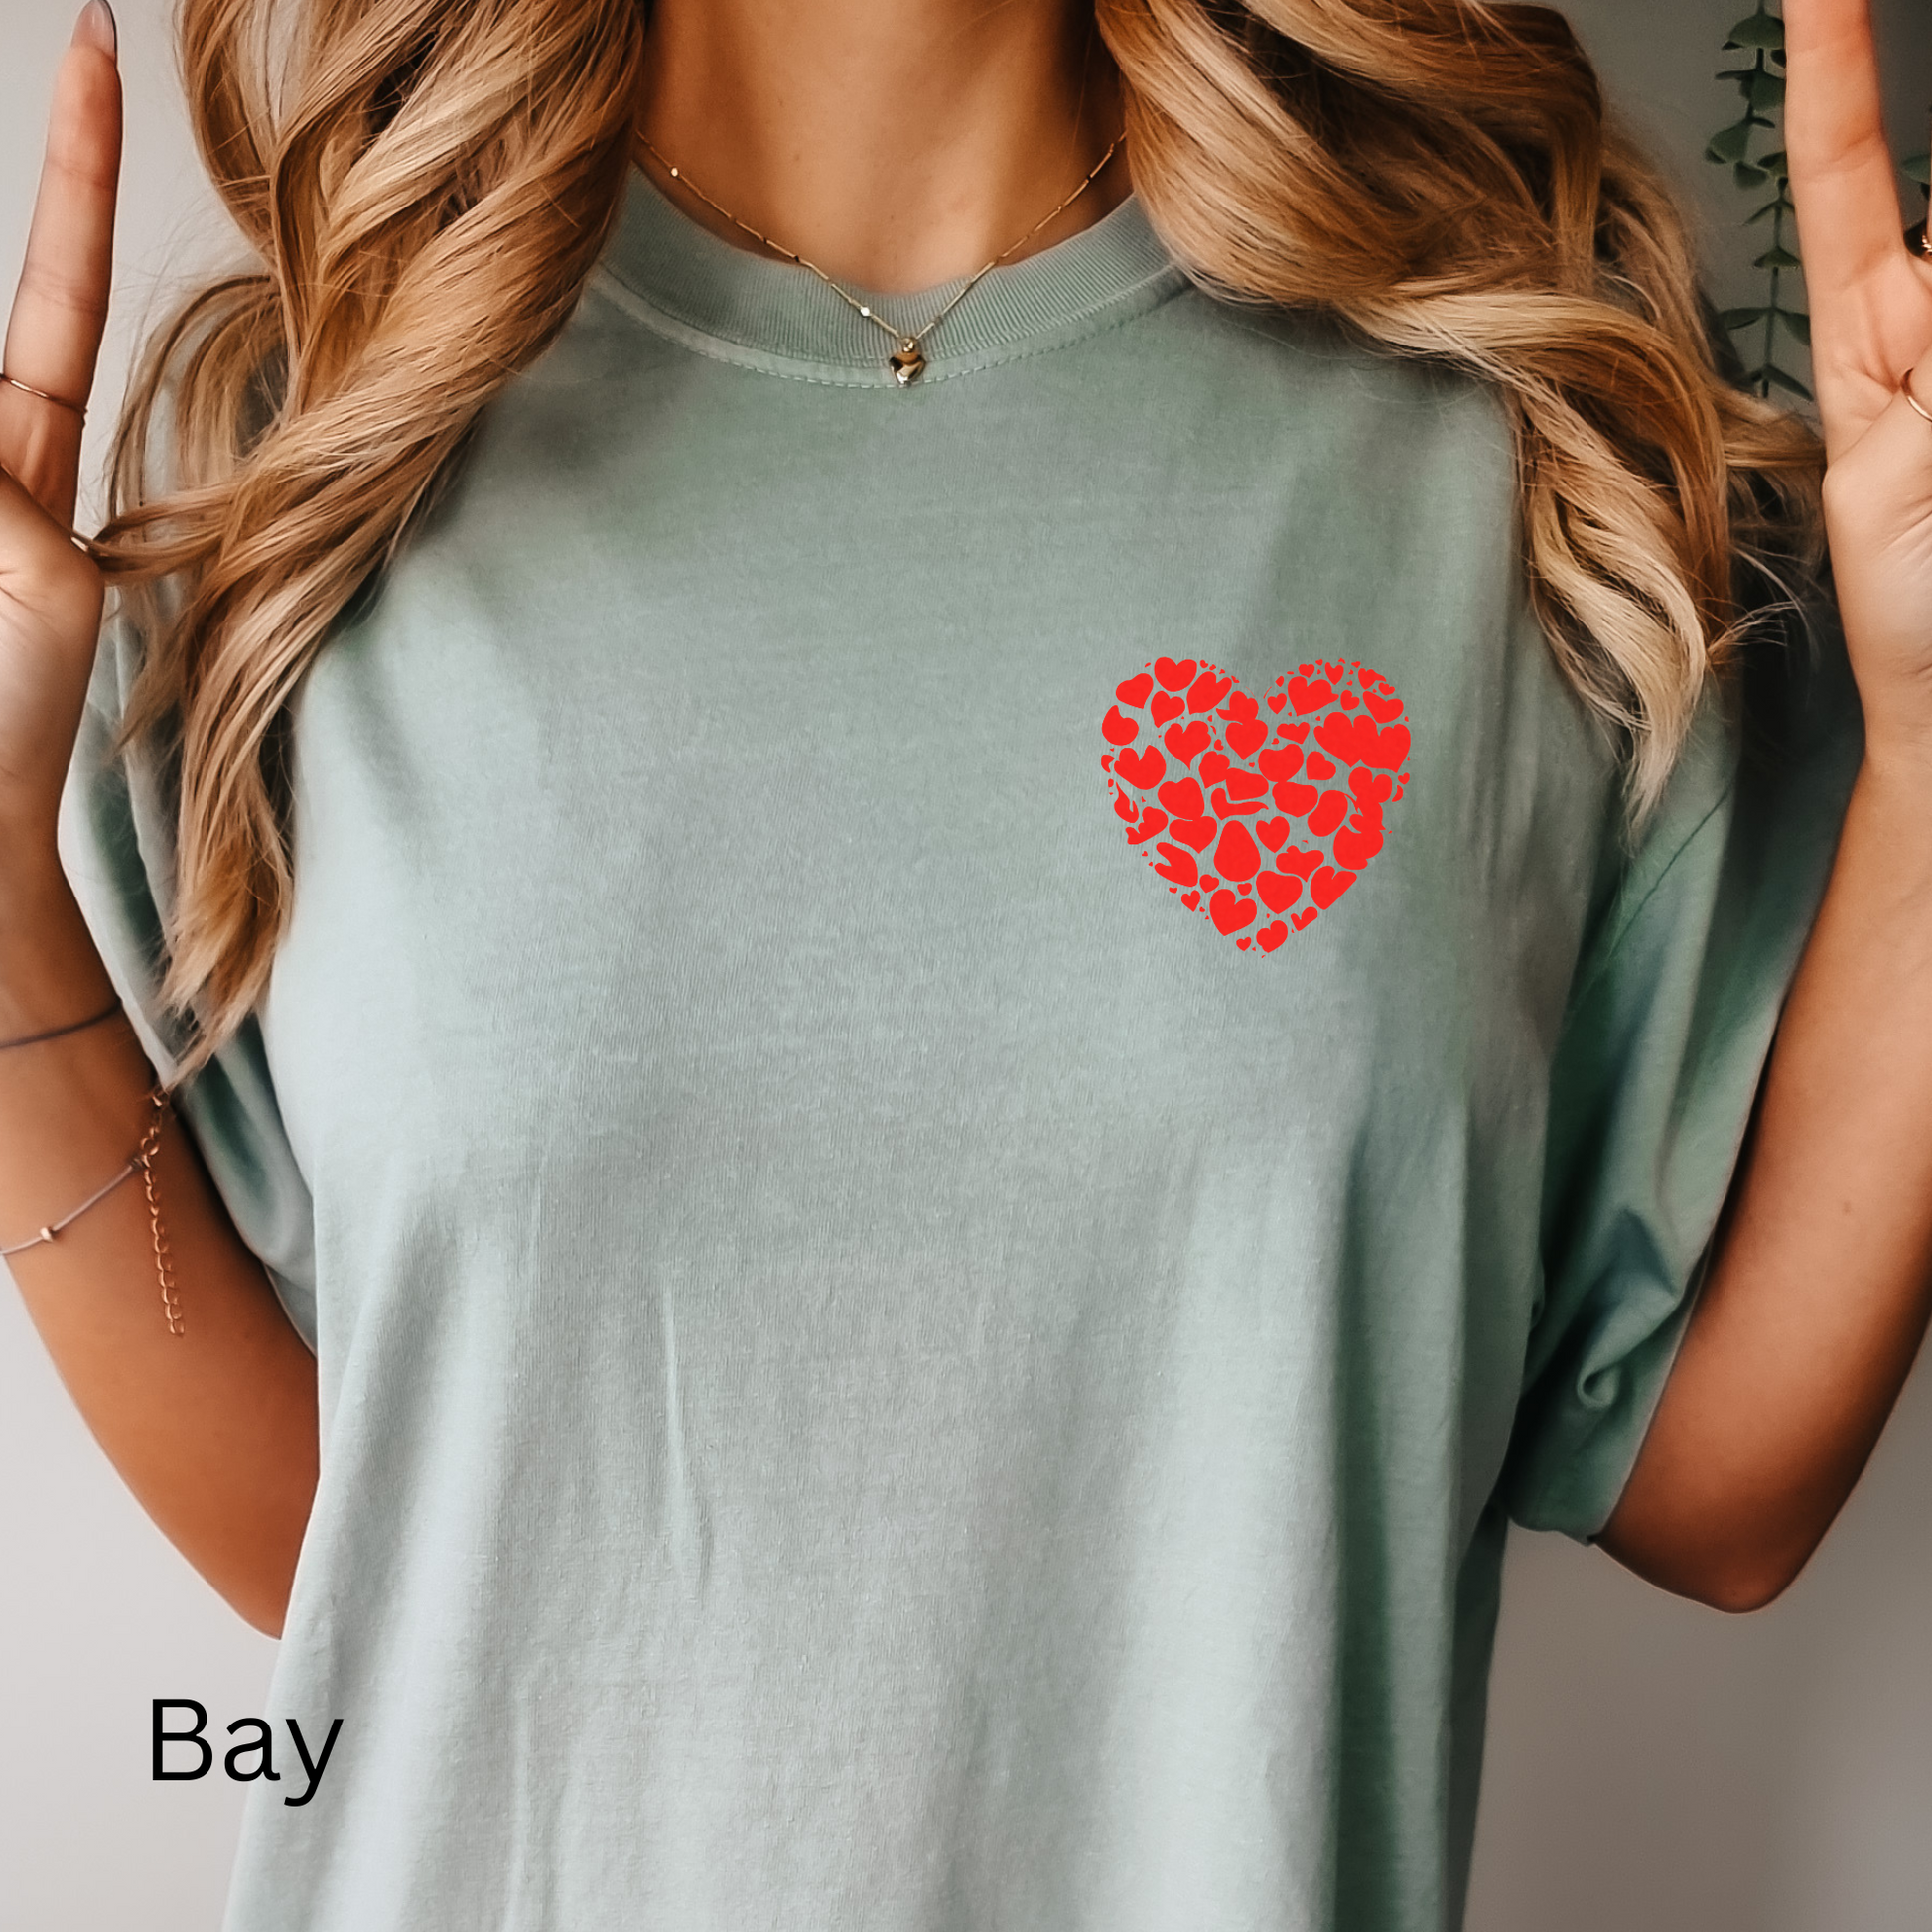 a woman wearing a green shirt with a red heart on it